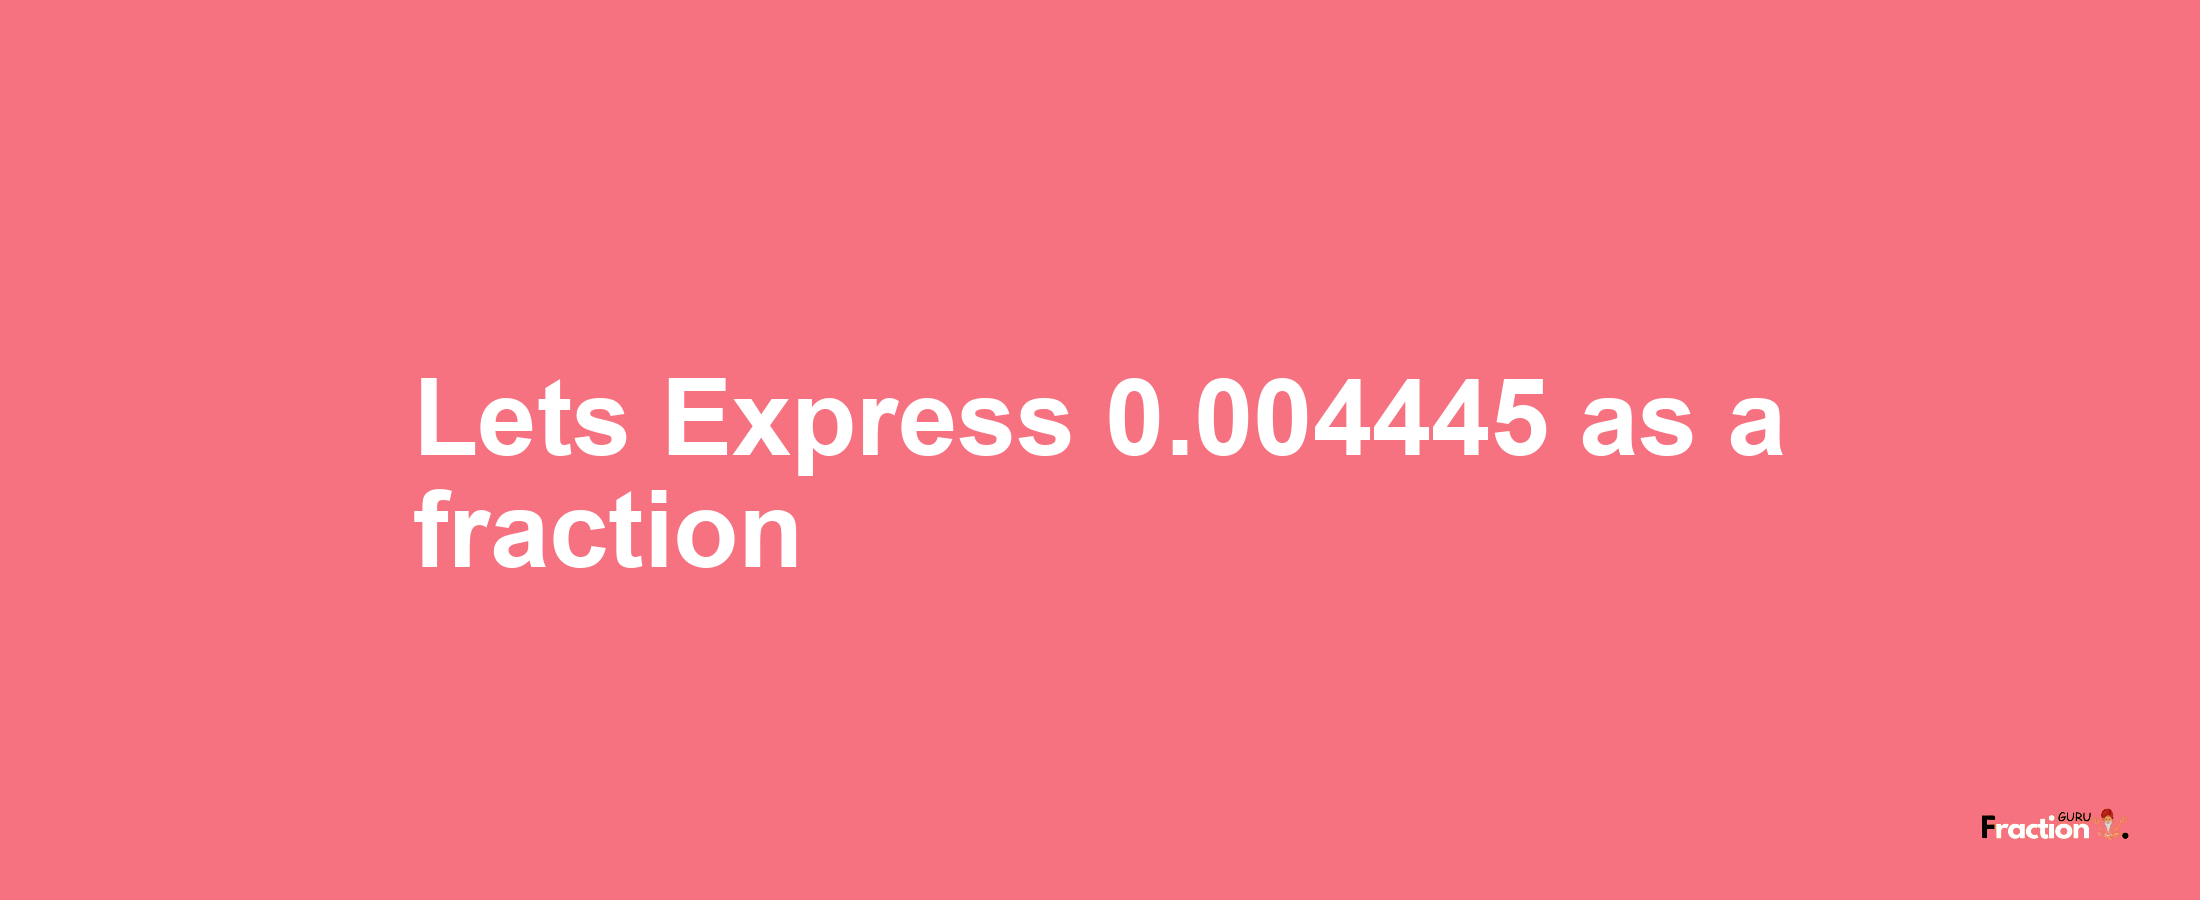 Lets Express 0.004445 as afraction